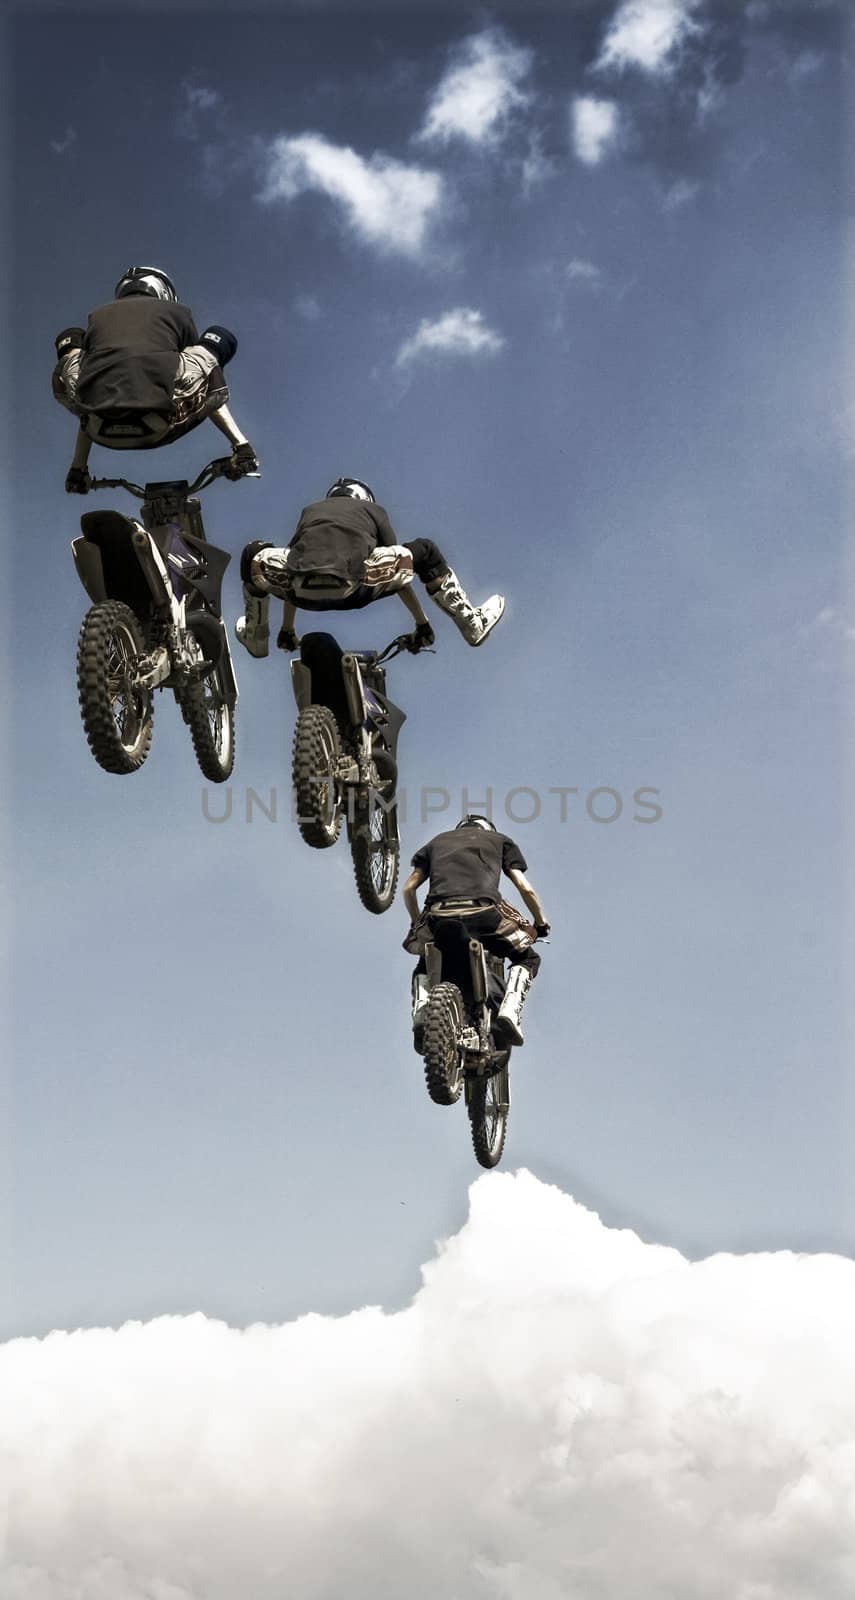 Outdoor shot, extreme rider performing a trick.